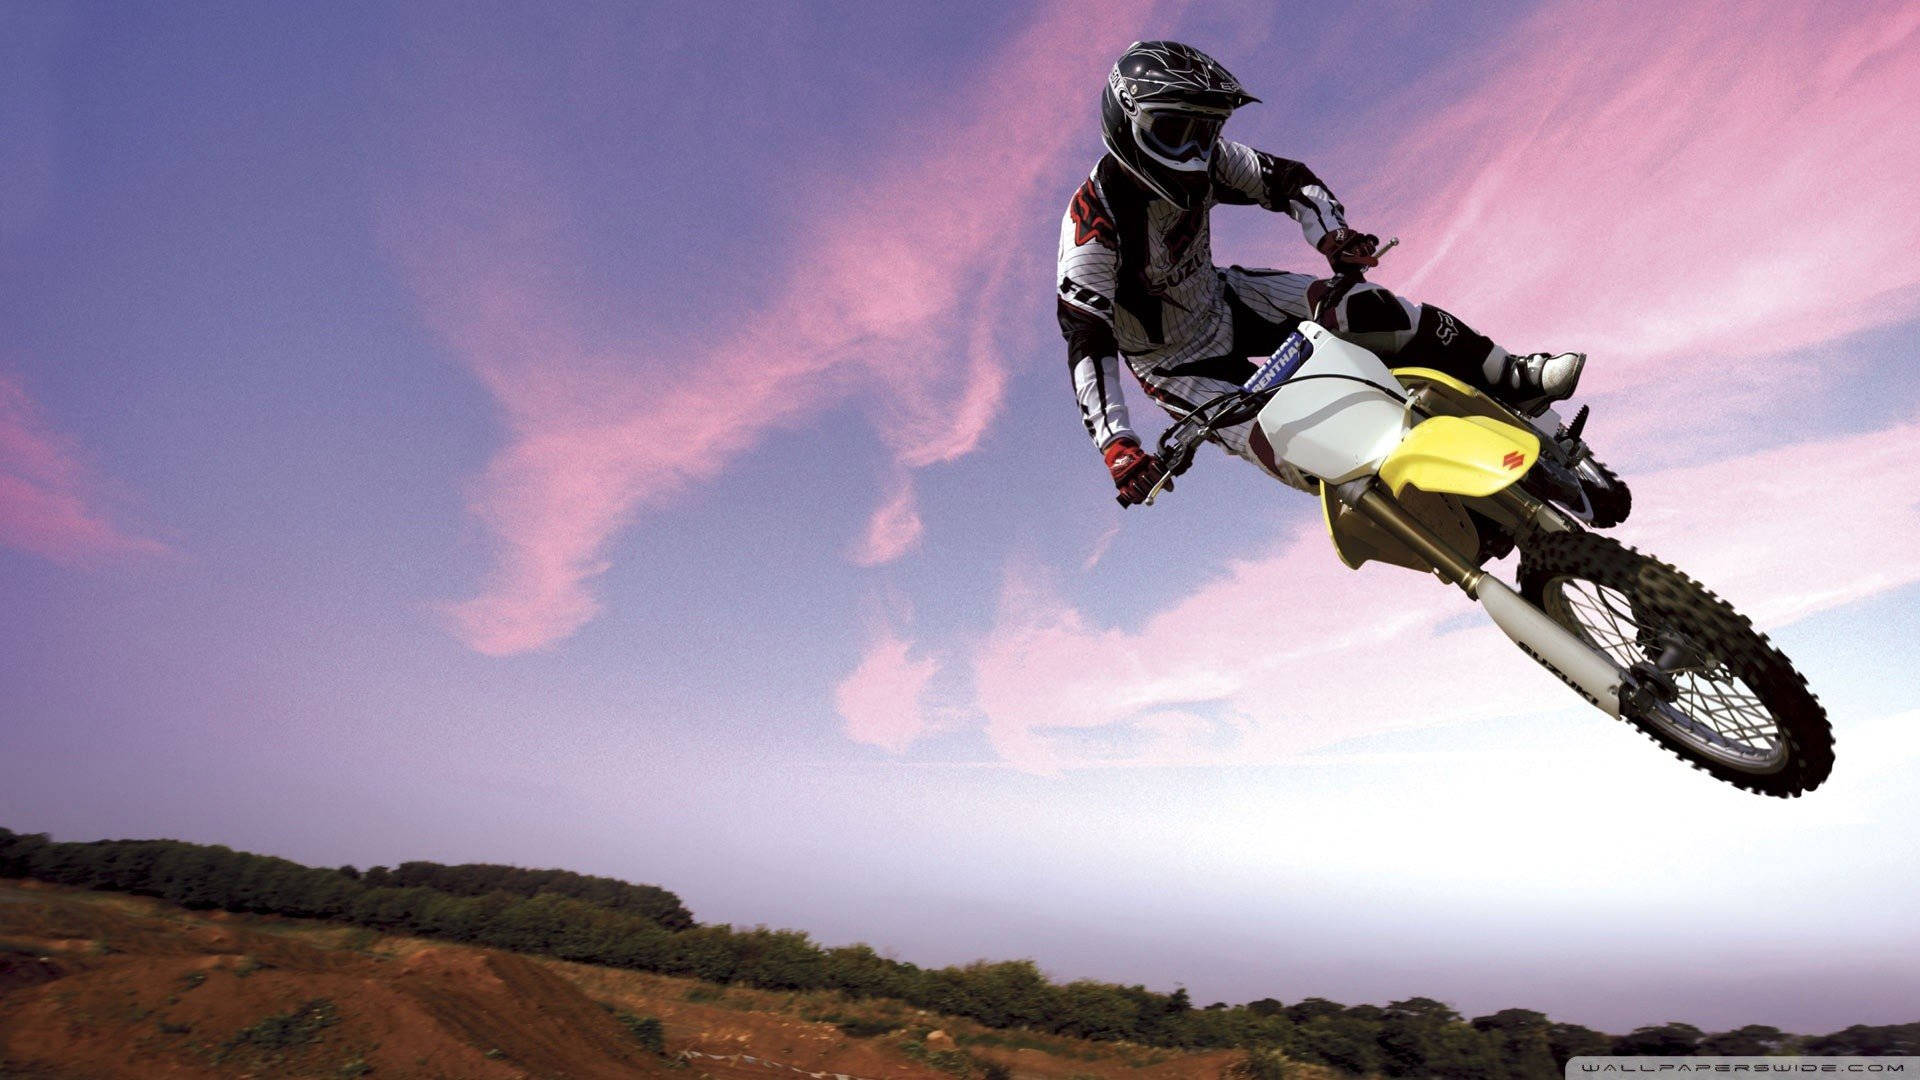 Breathtaking Mid-air Moment On A Dirt Bike Background